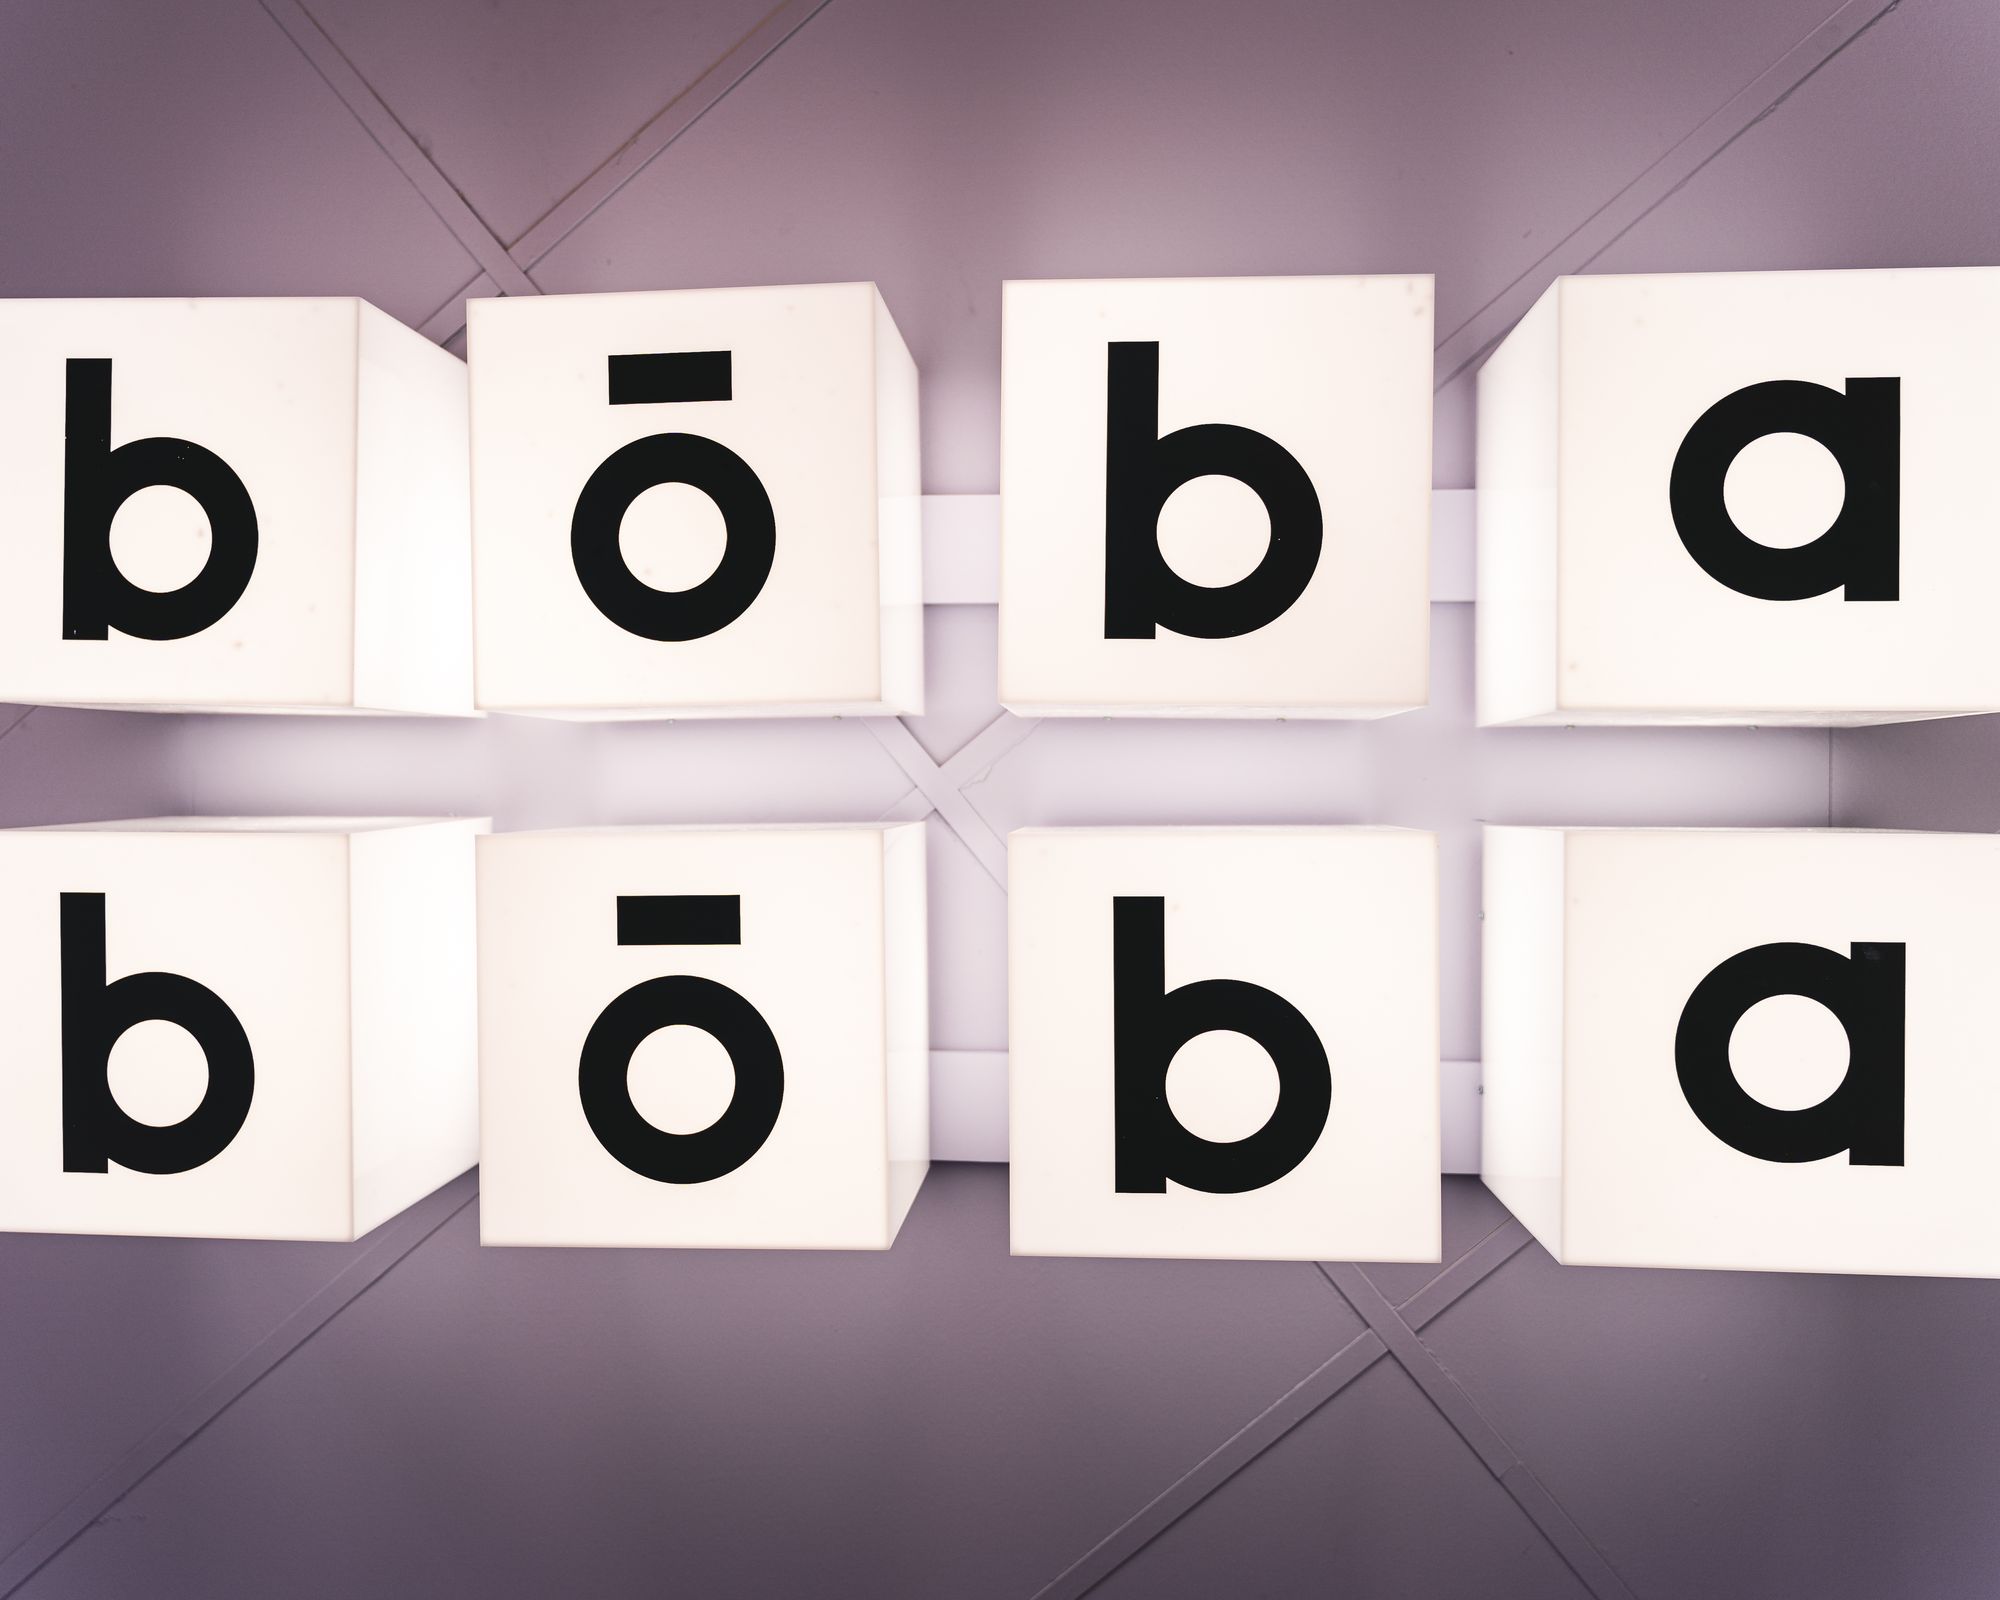 Letters spelling out "bobaboba"